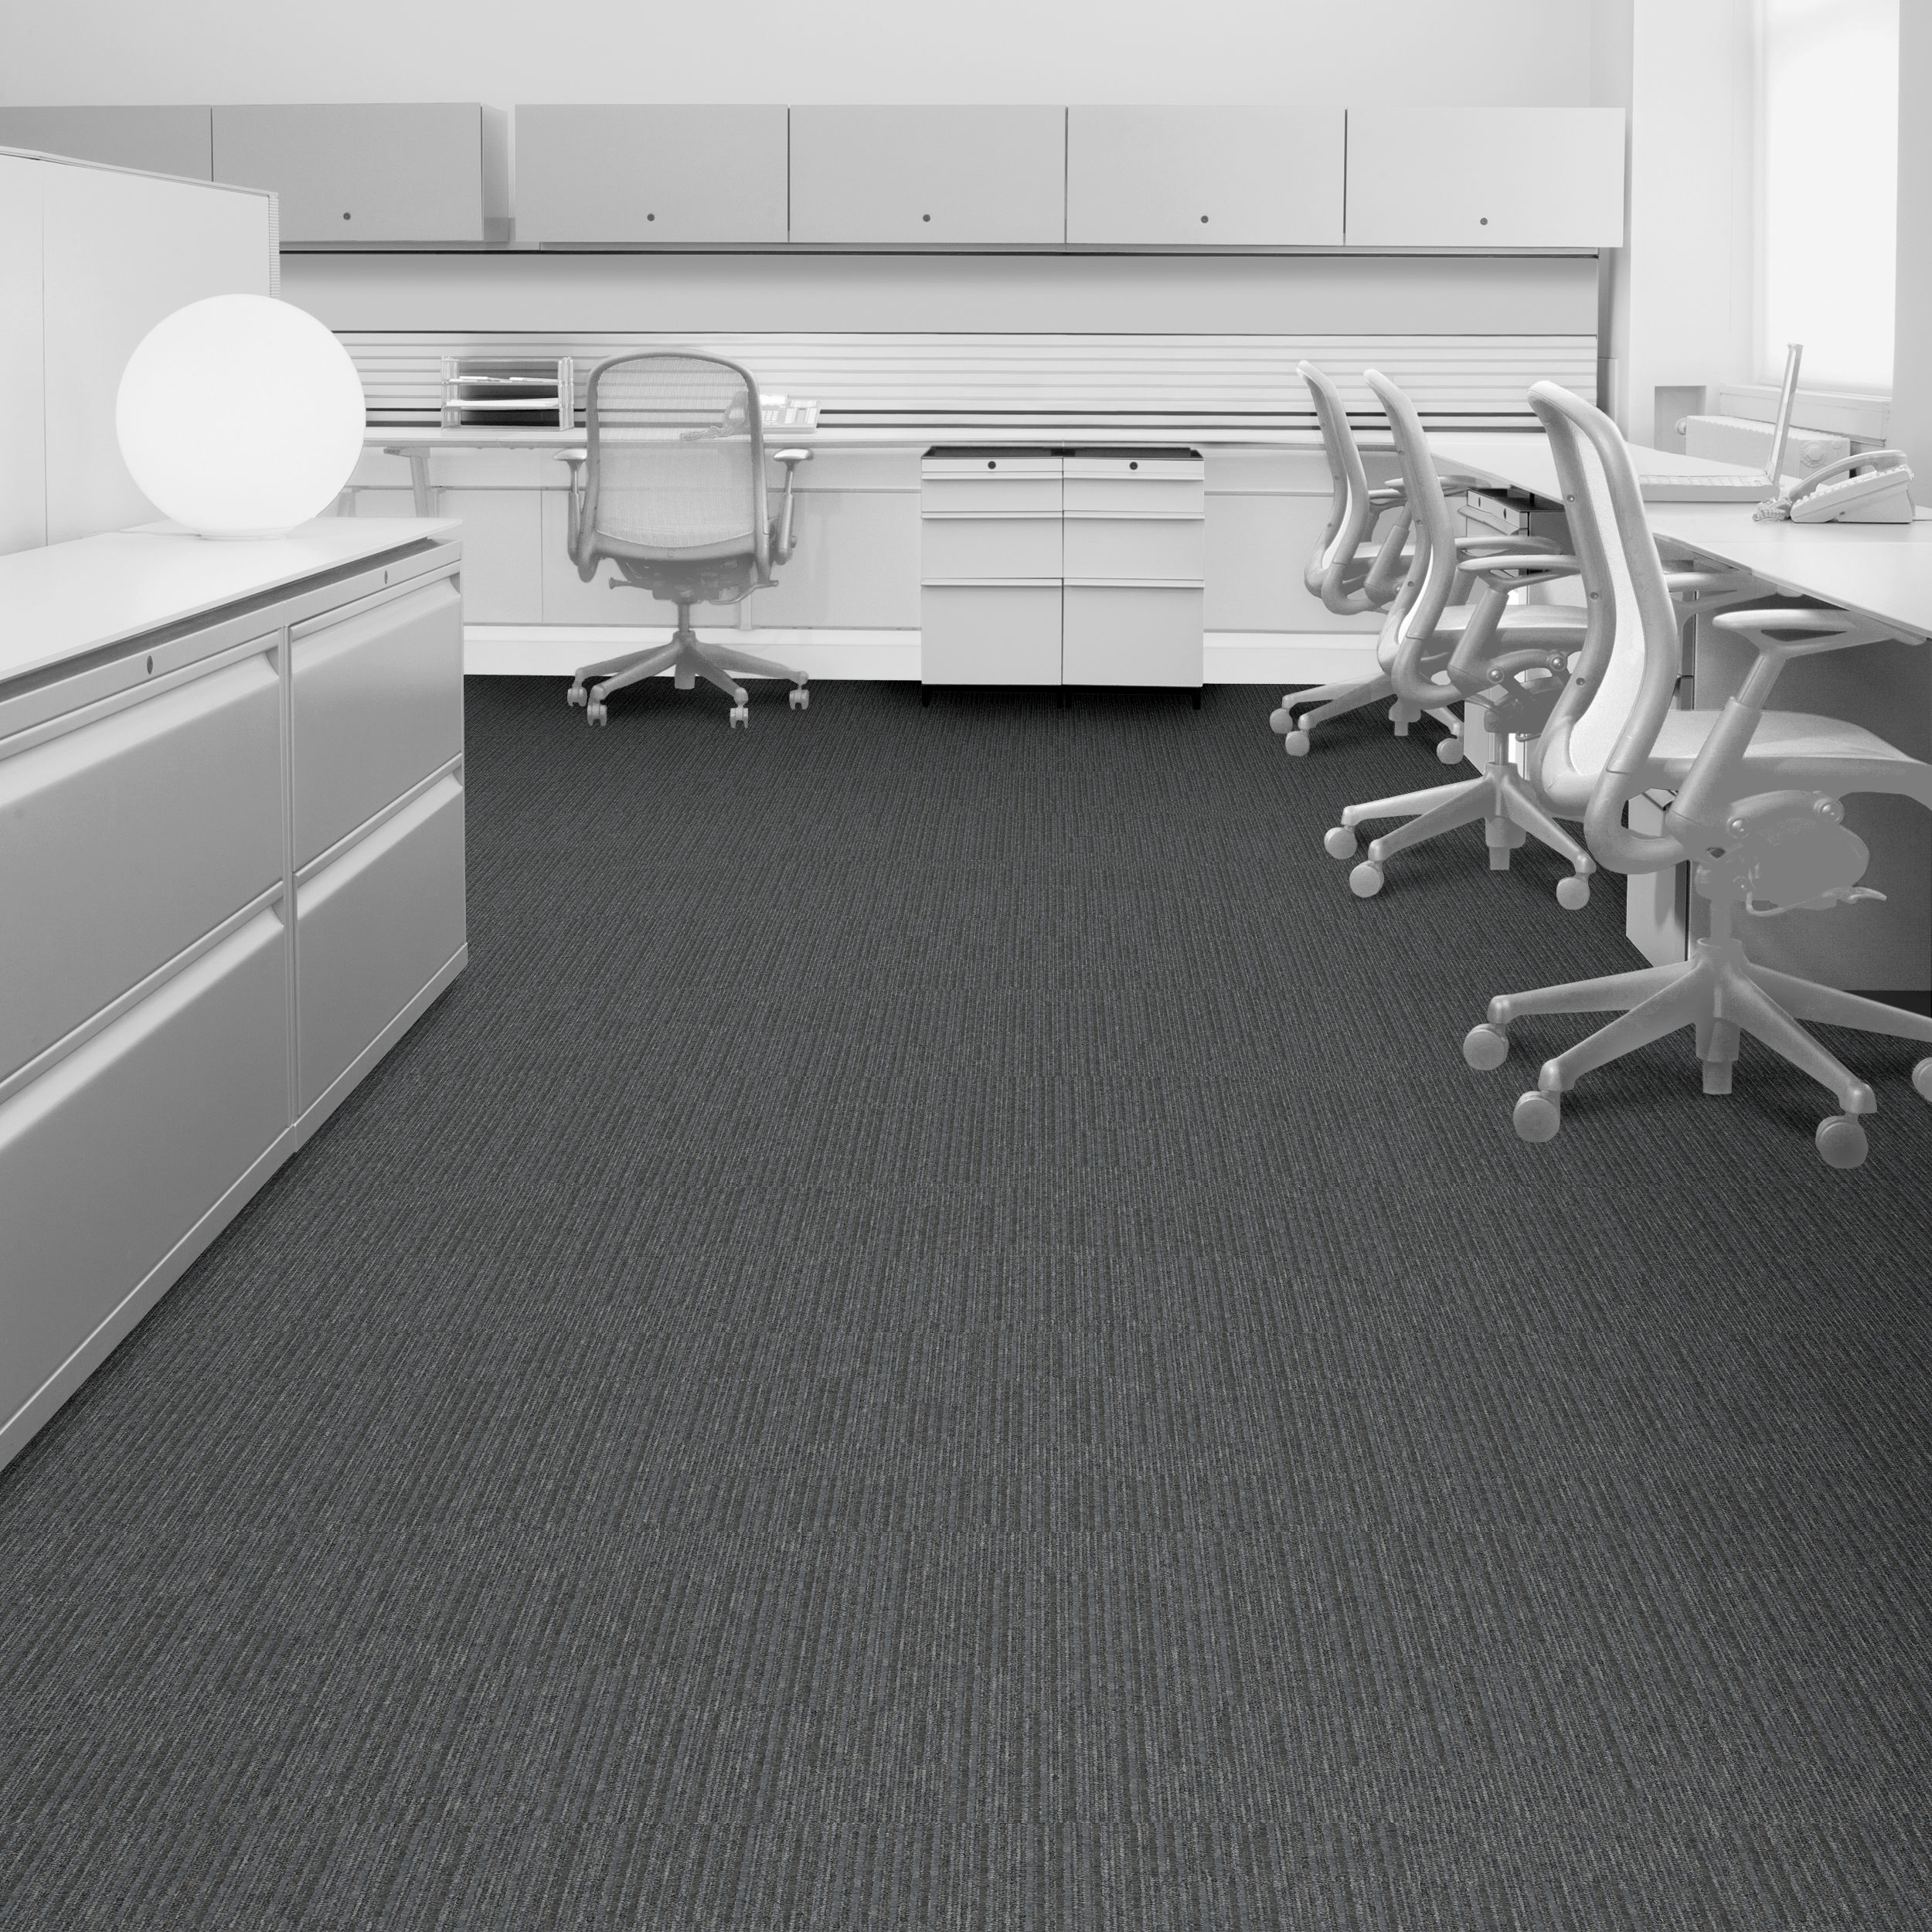 Interface Equilibrium Uniformity Carpet Tile in office setting.